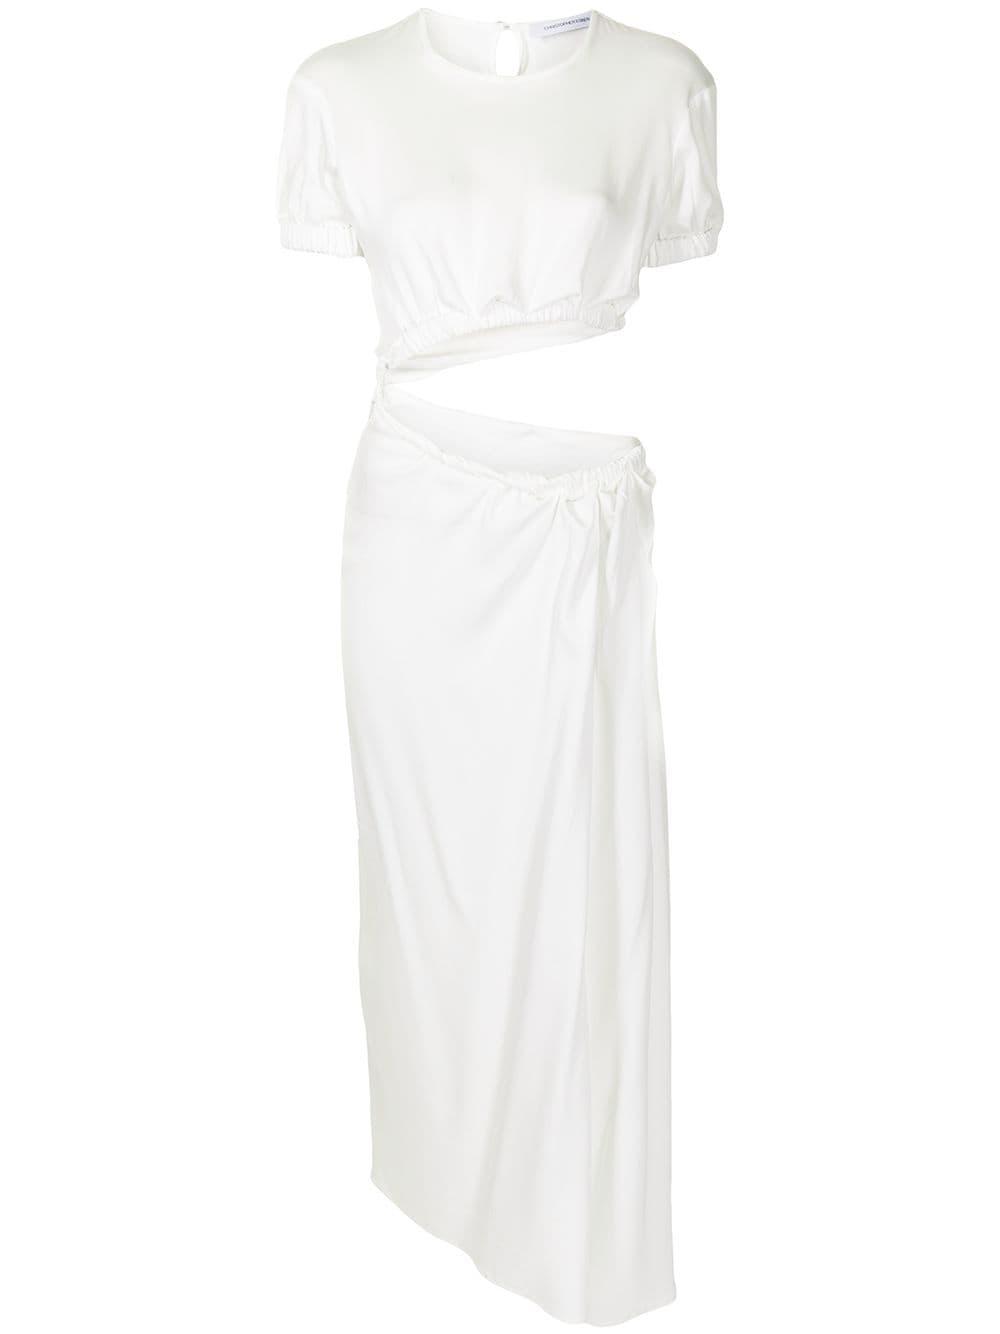 Christopher Esber Rolled Up Cut-out Dress in White | Lyst Australia